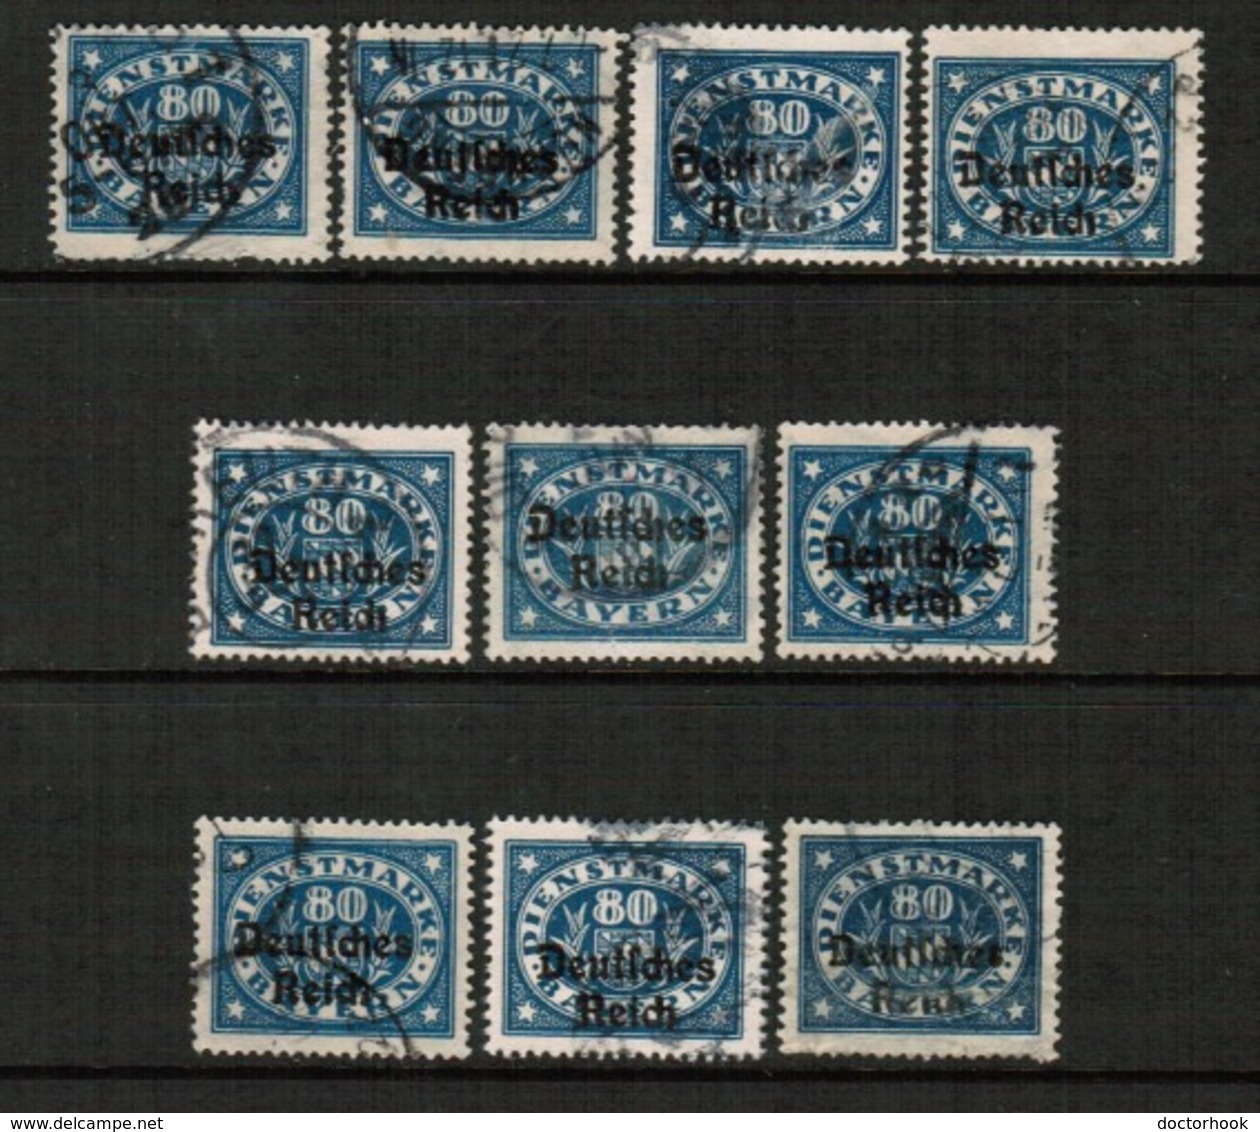 BAVARIA  Scott # O 62 USED WHOLESALE LOT OF 10 (WH-312) - Lots & Kiloware (mixtures) - Max. 999 Stamps